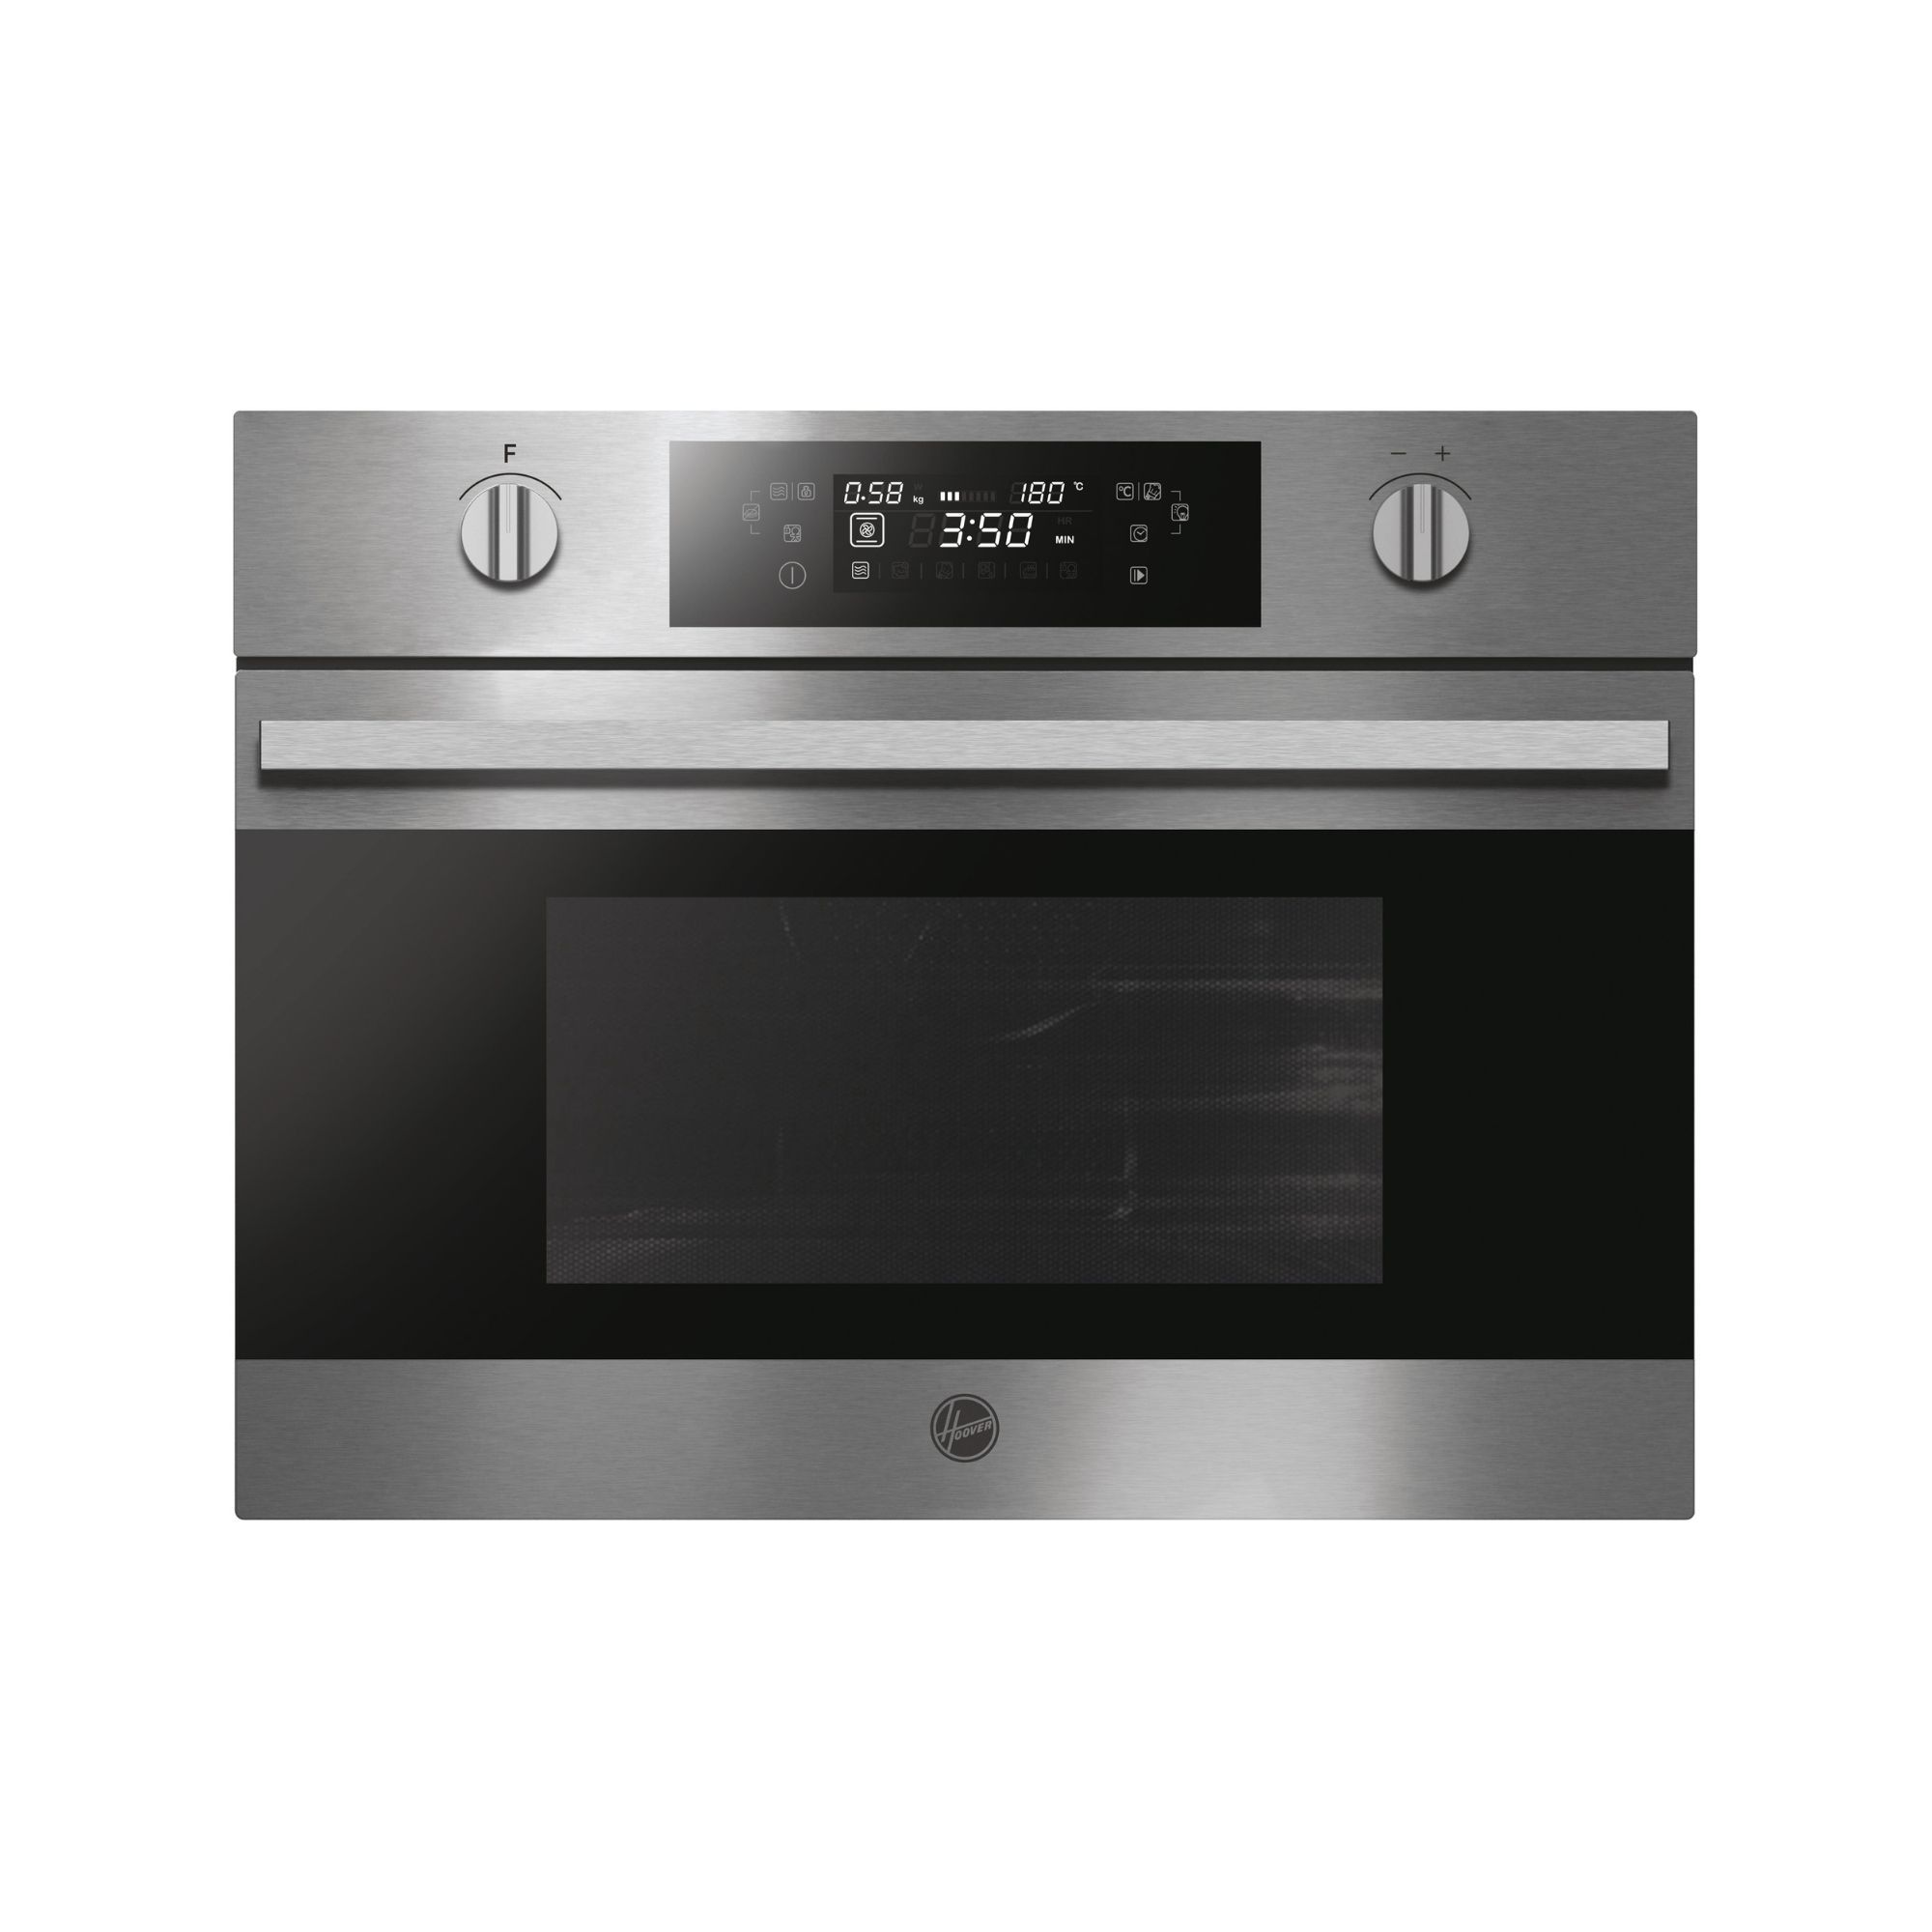 Hoover HMG440C3H 44L Built-in Microwave - Stainless steel